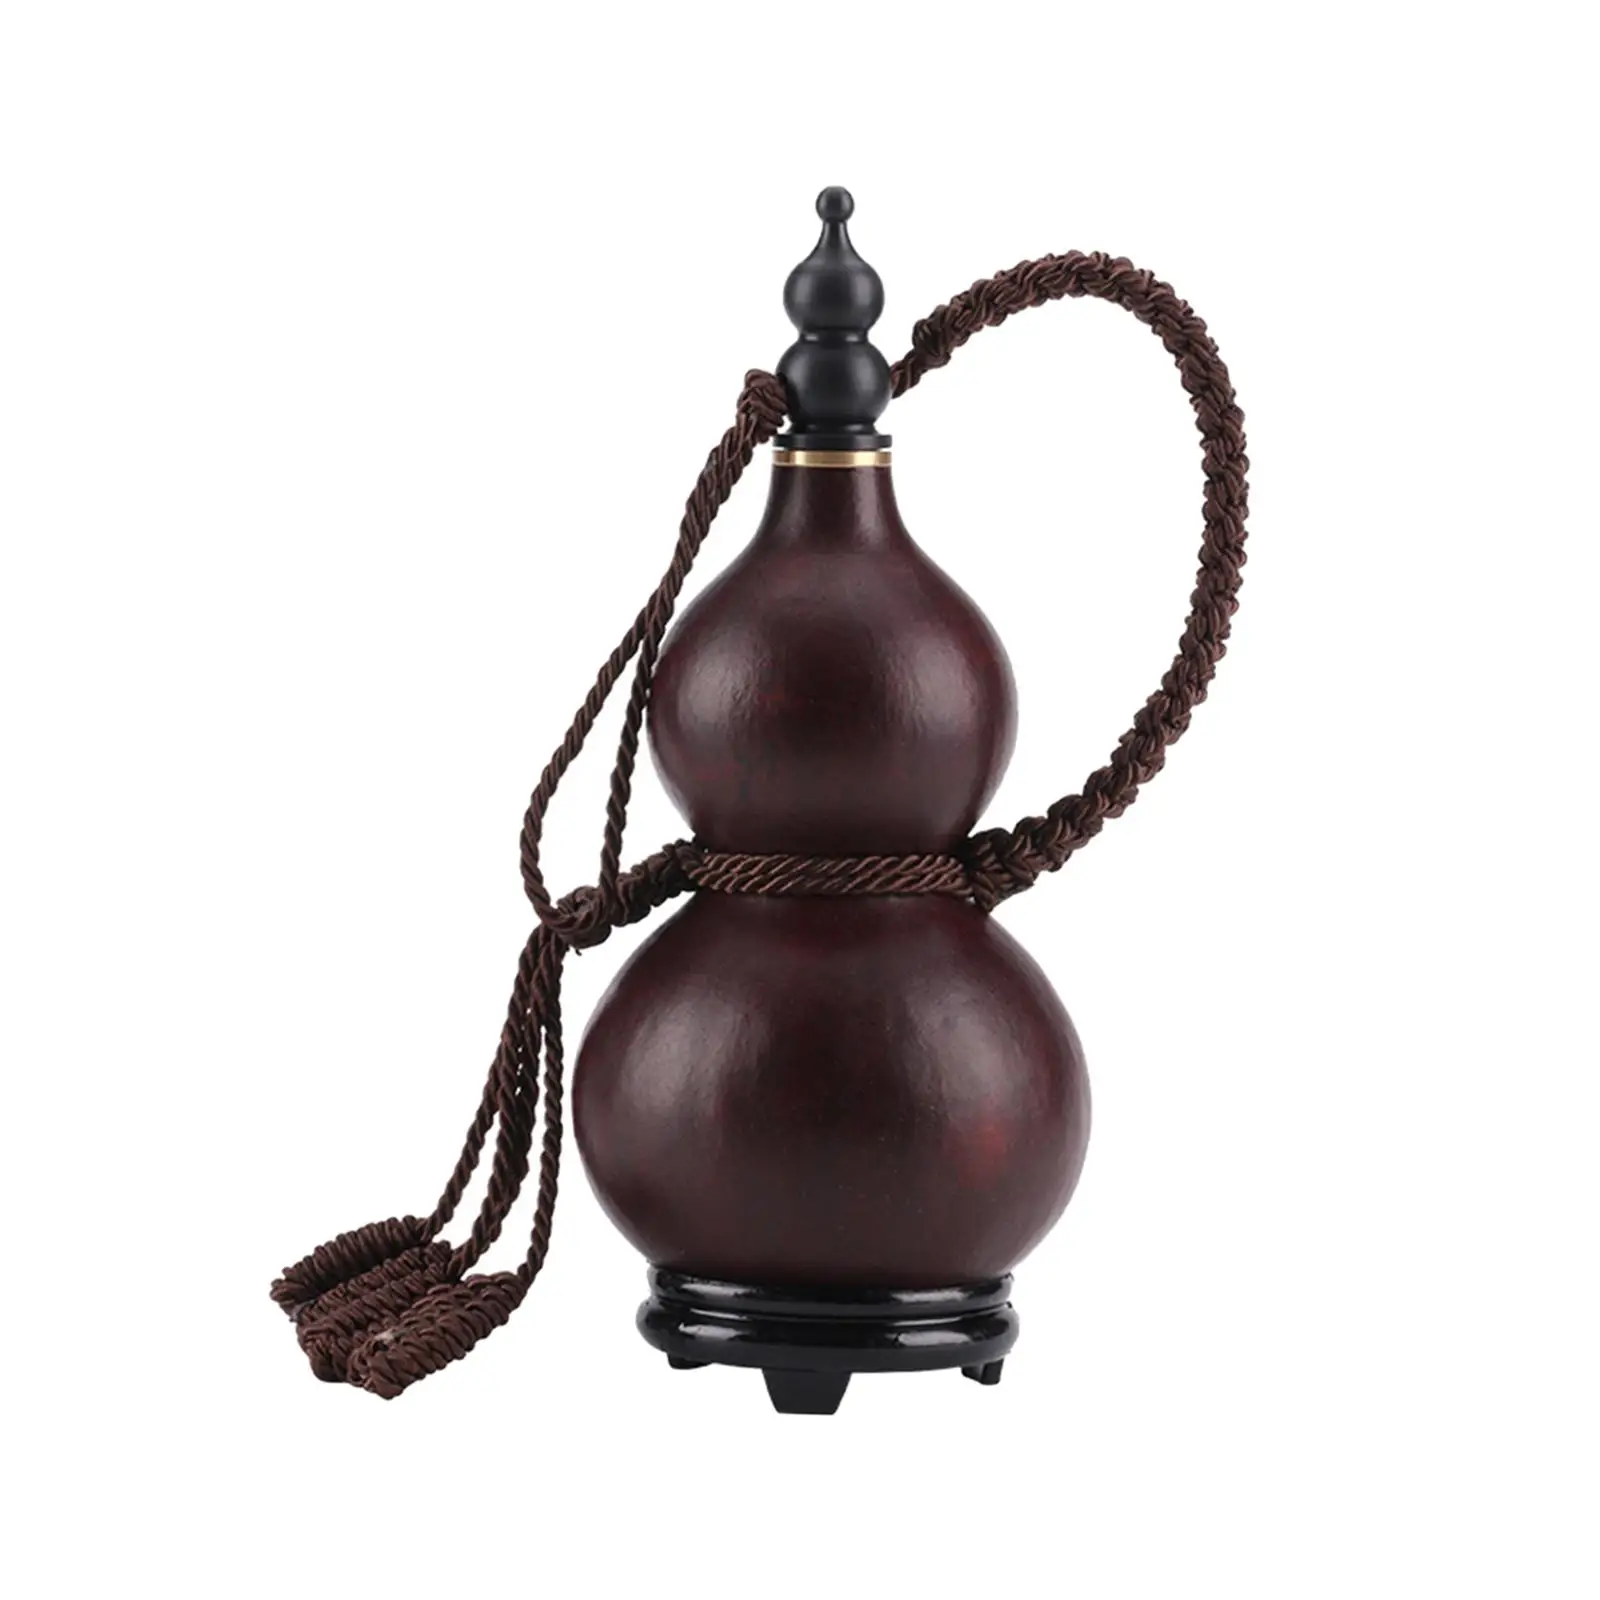 Traditional Gourd Wine Bottle Hollow Calabash with Lid Drinking Gourd Portable for Drinks Holder Indoor Craft Outdoor Decoration